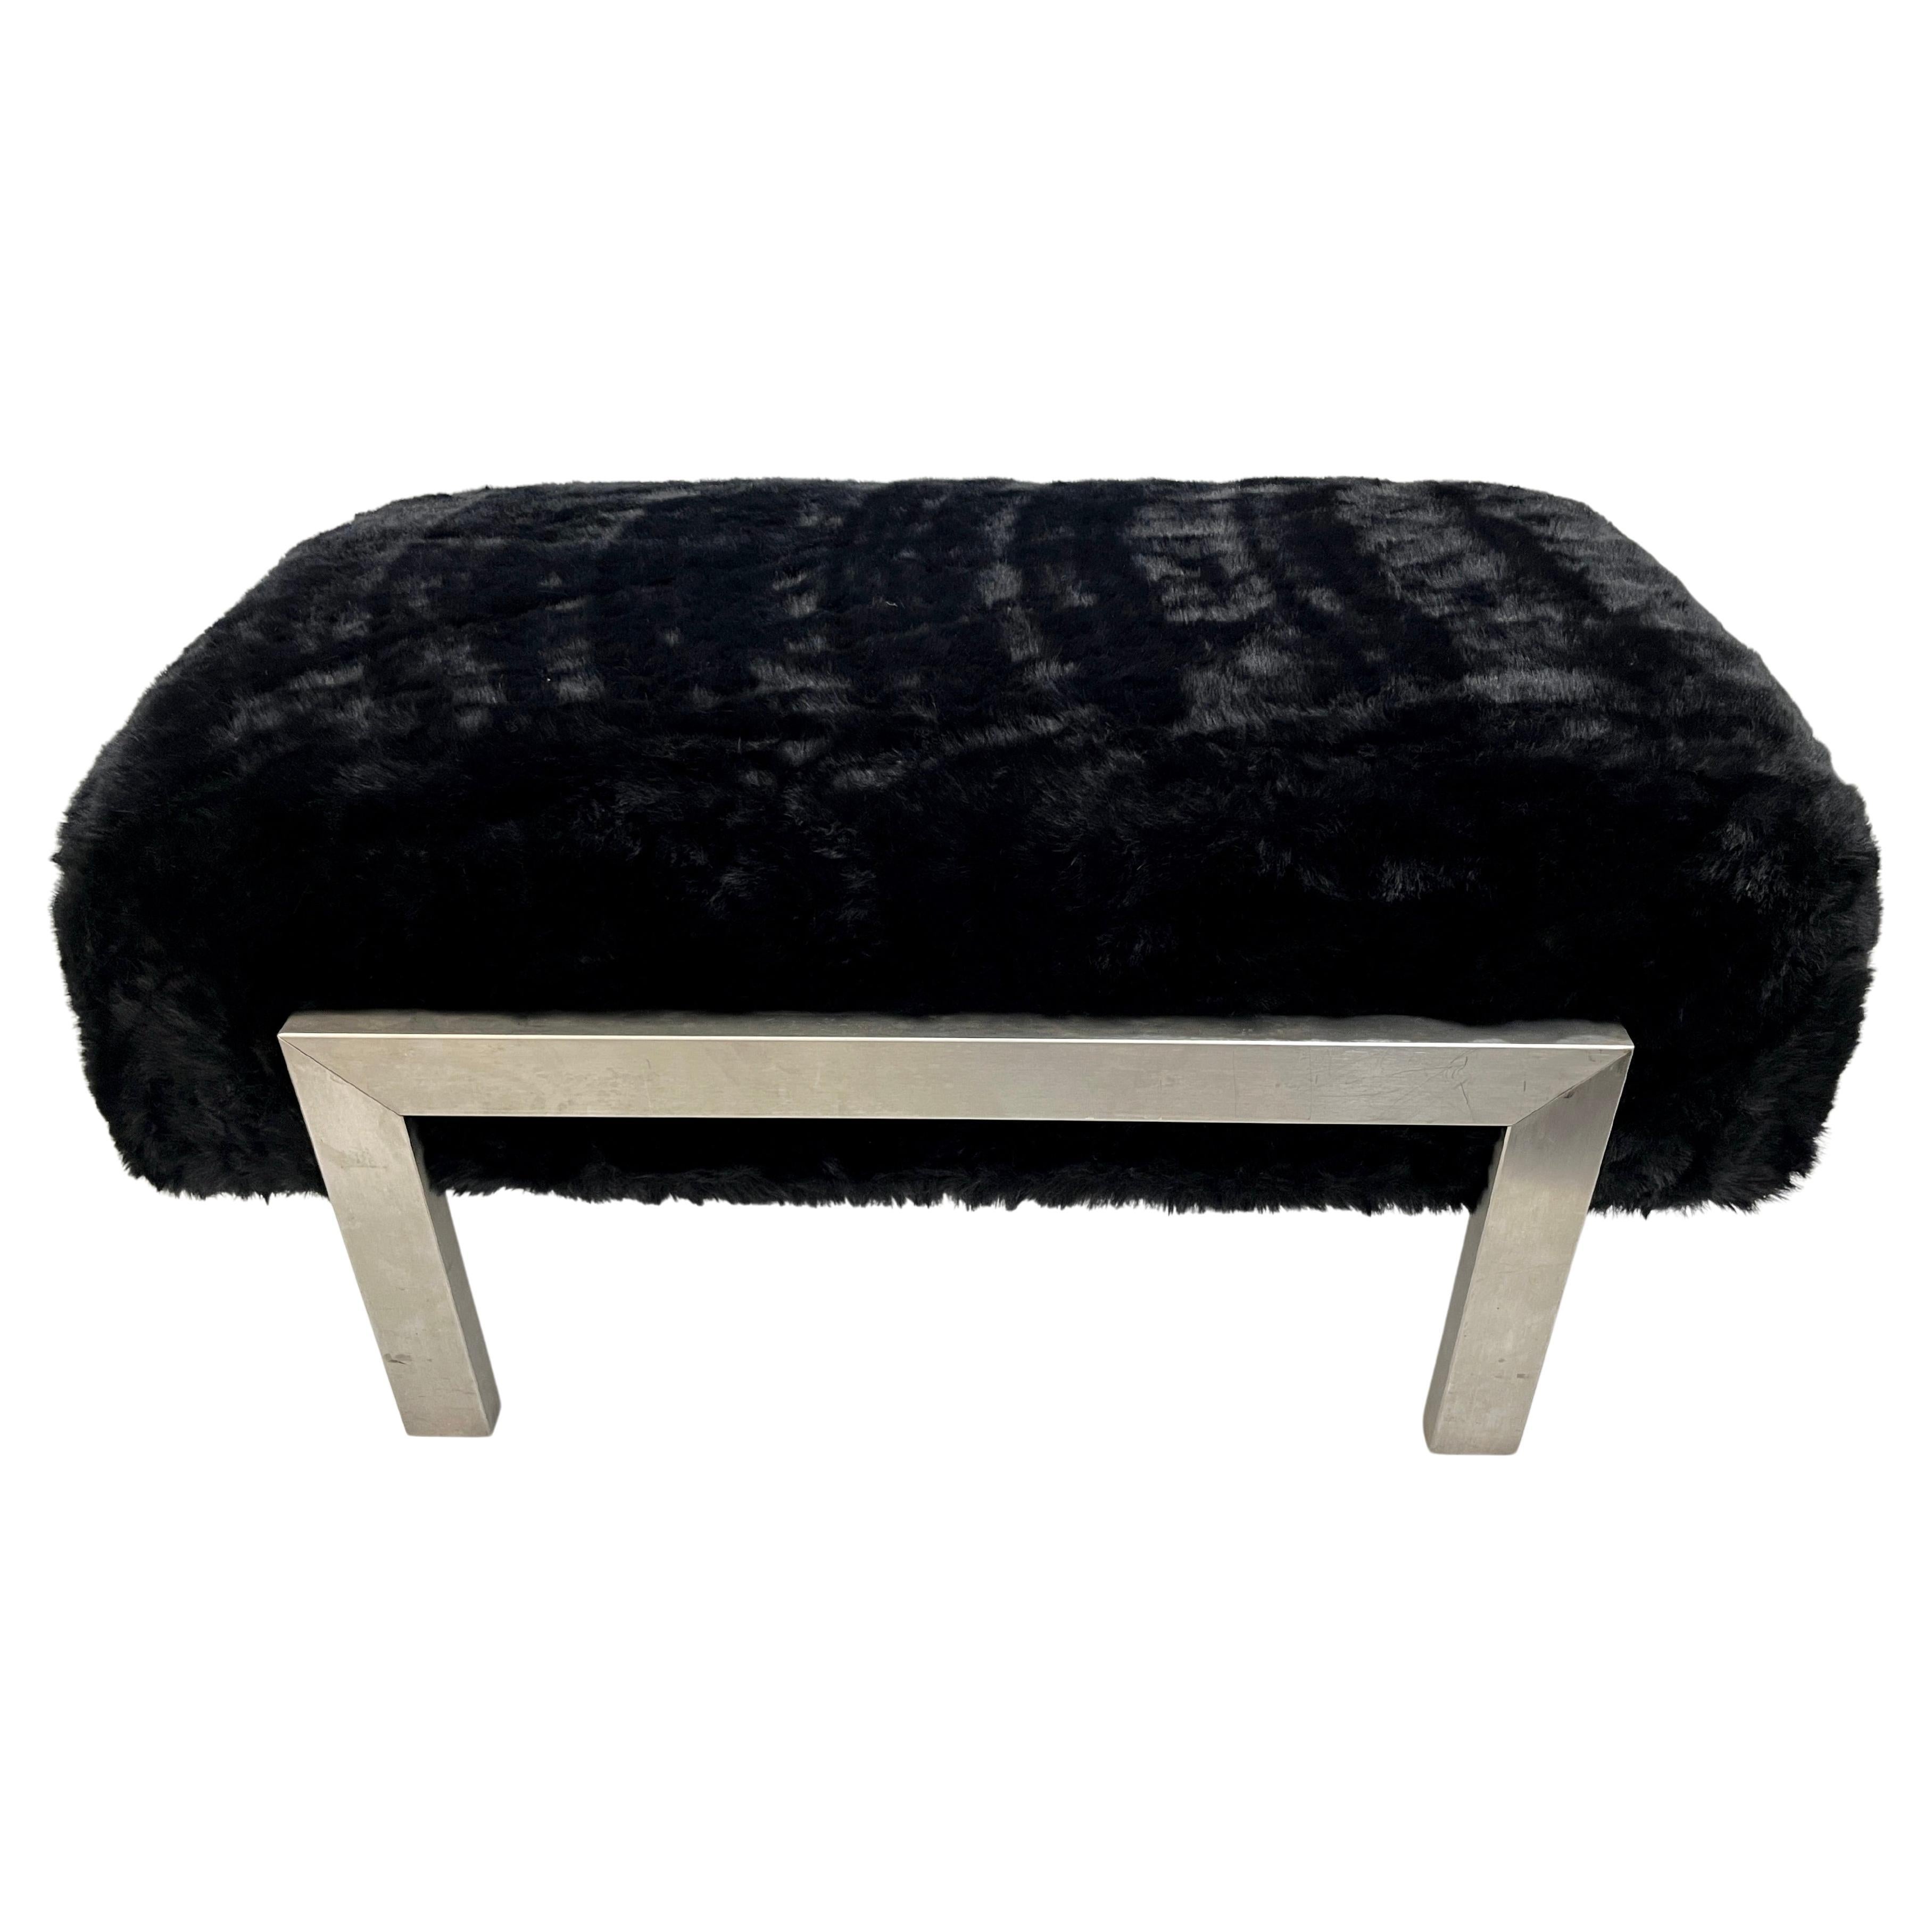 1970s Italian Vintage Black Faux Fur Steel Bed Stool Bench - 1 Pair available For Sale